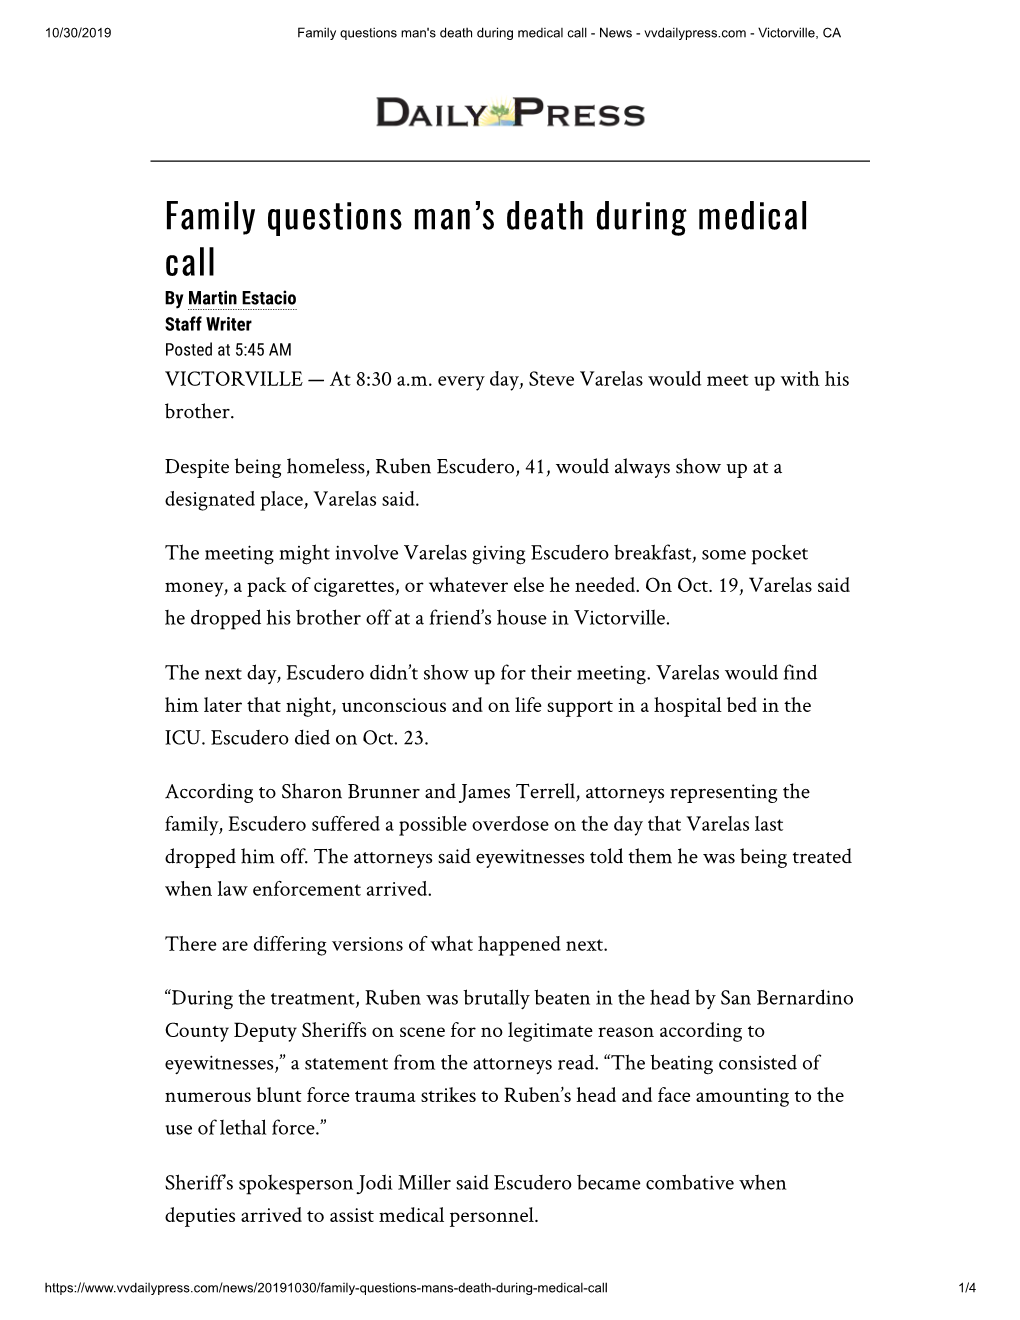 Family Questions Man's Death During Medical Call - News - Vvdailypress.Com - Victorville, CA